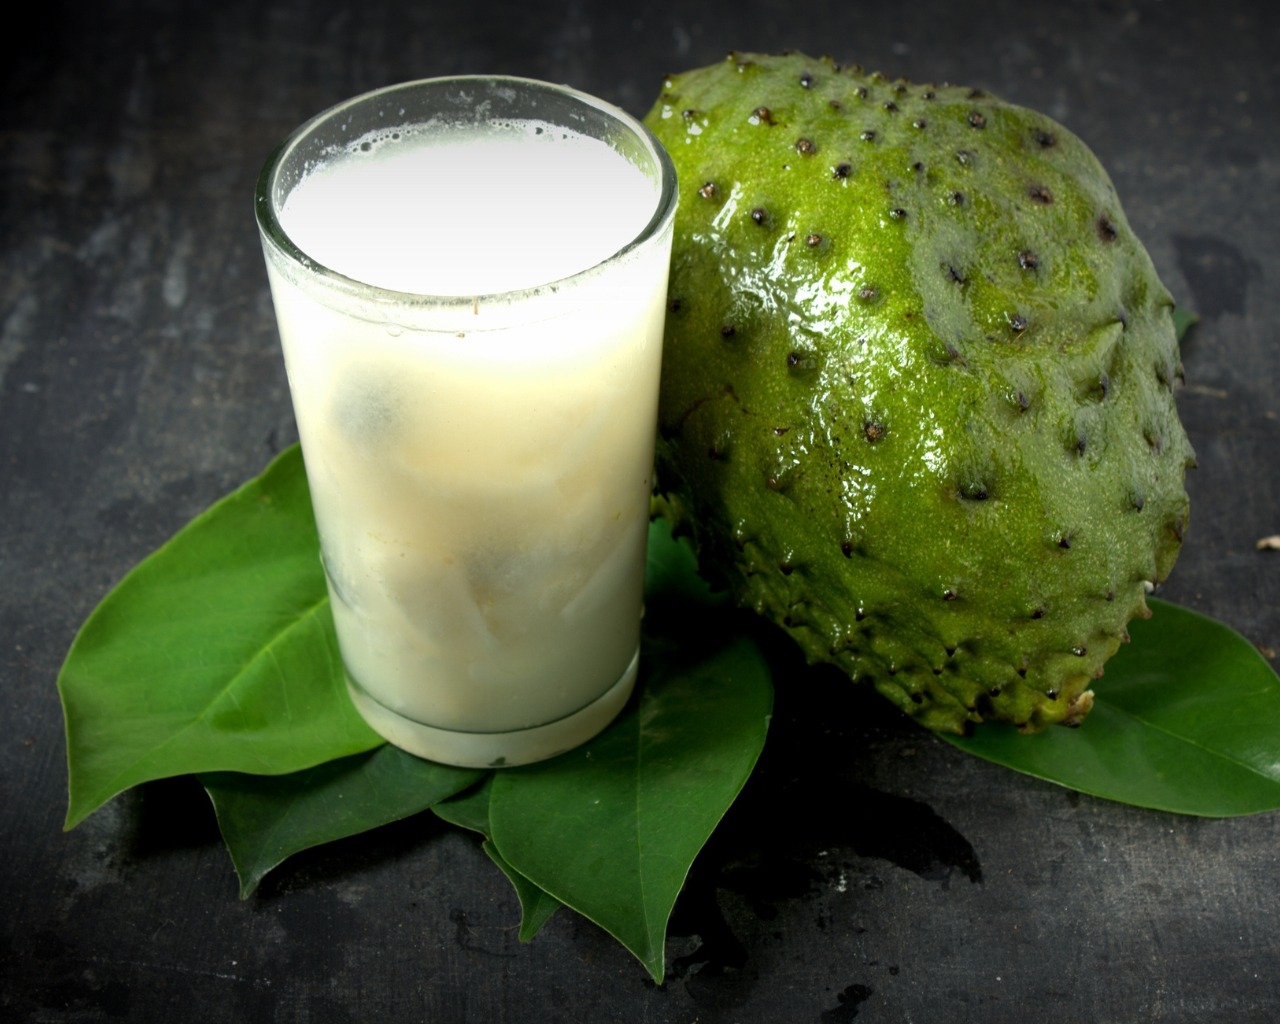 Soursop is the fruit of Annona muricata